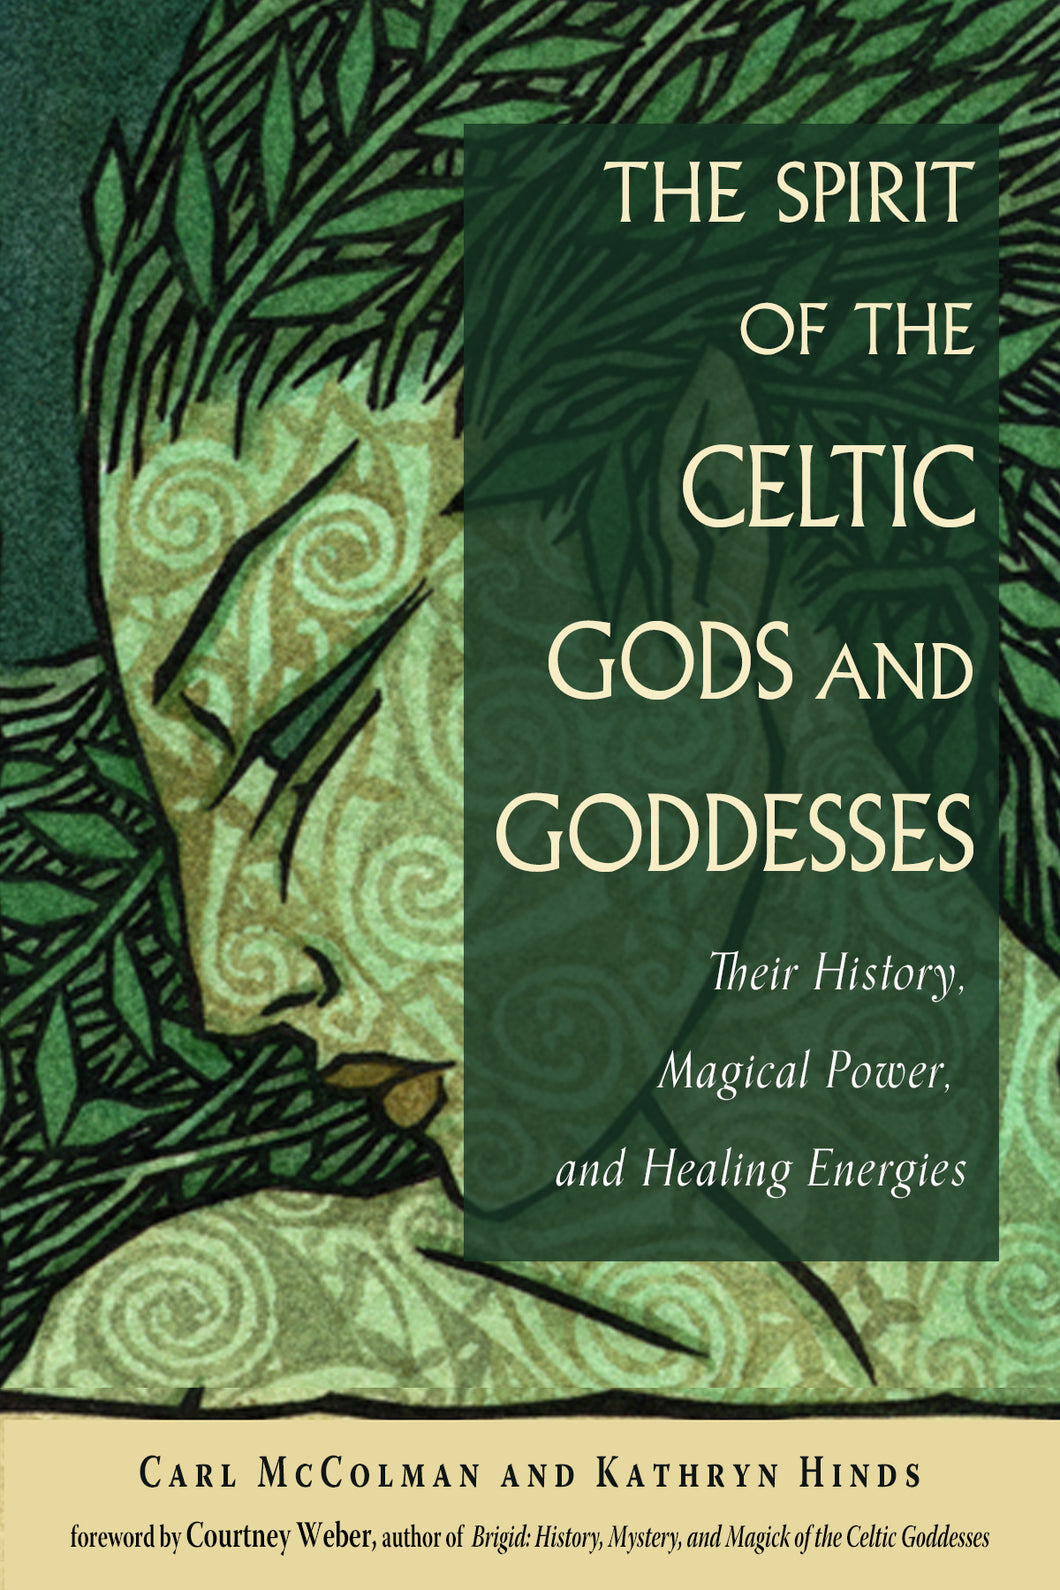 The Spirit of the Celtic Gods and Goddesses Their History, Magical Power, and Healing Energies